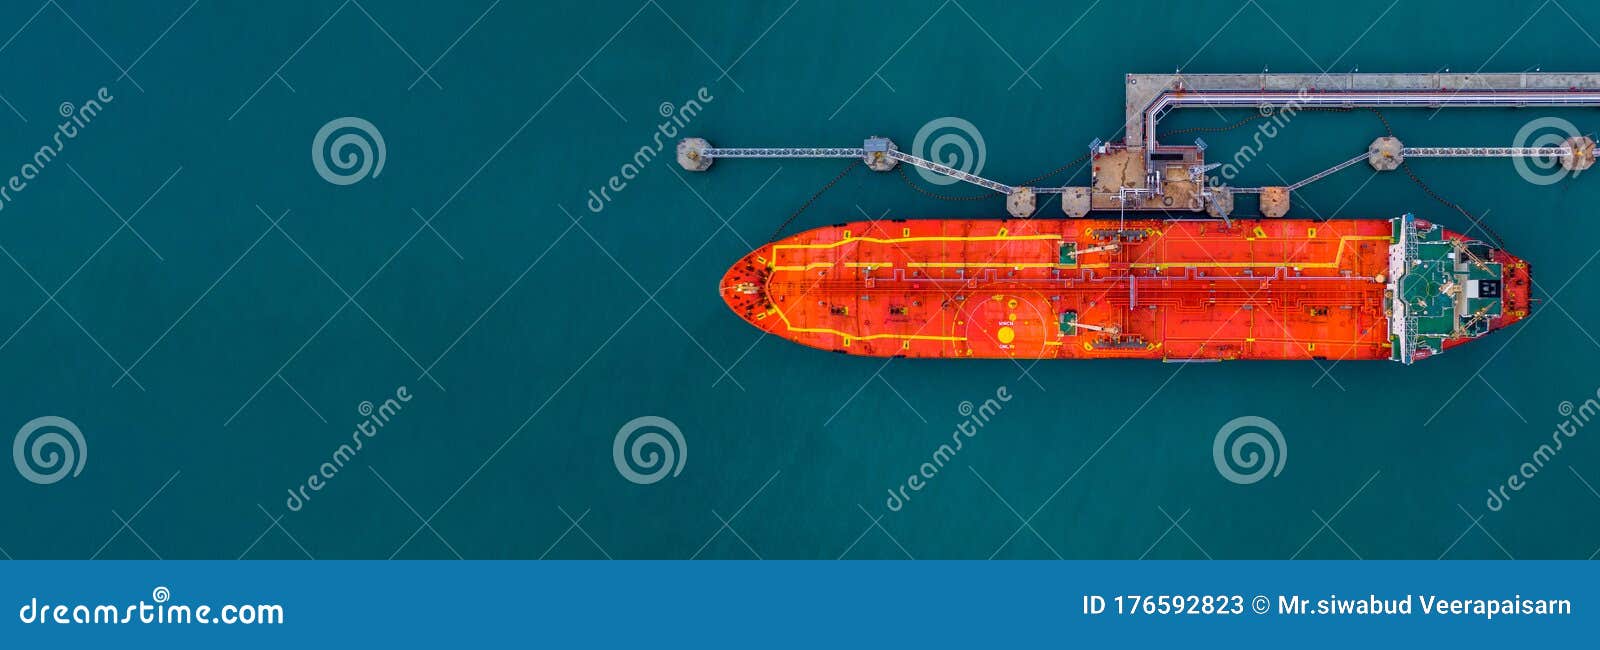 aerial view red cargo tanker ship vessel at port with marine loading arms, global business oversea commercial trade logistic